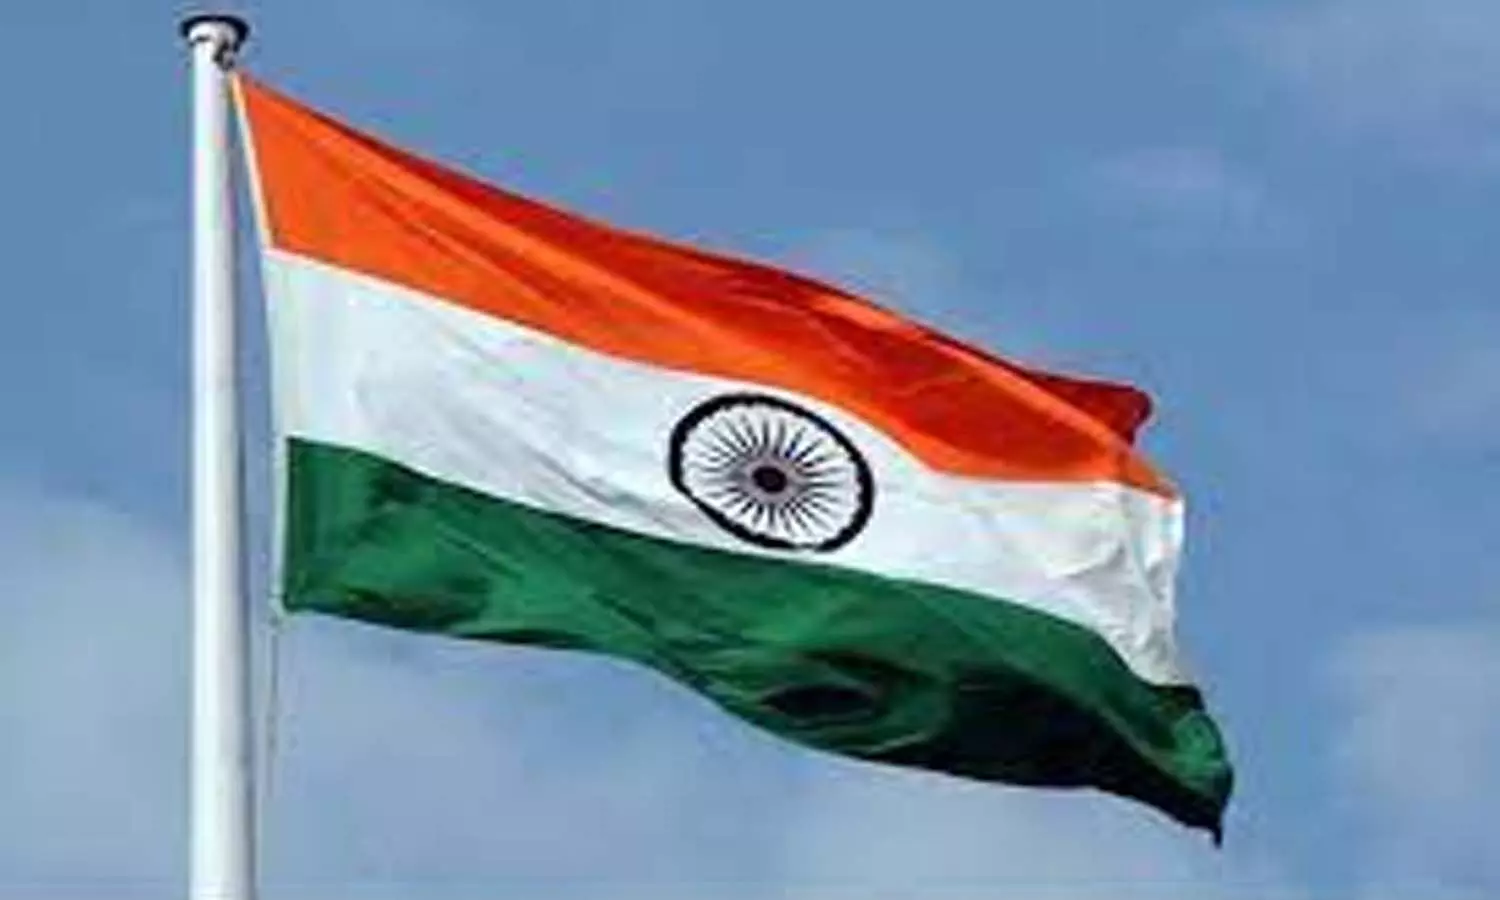 In Jhansi, the three strips of the tricolor are not the same, a thousand flags were changed due to a printing error.